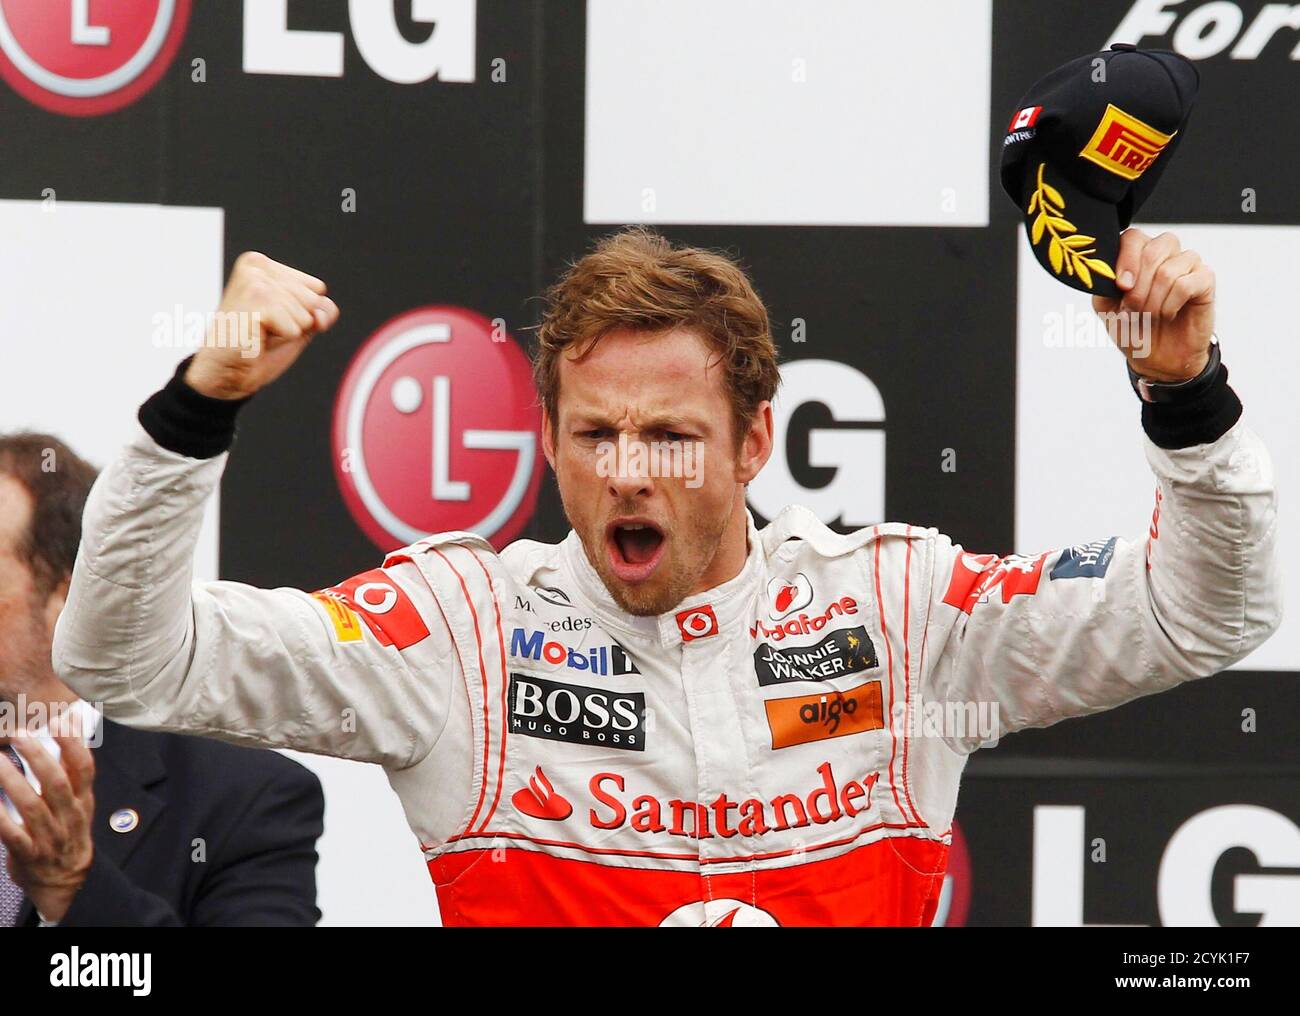 McLaren Formula One driver Jenson Button of Britain celebrates winning the Canadian F1 Grand Prix on the podium at the Circuit Gilles Villeneuve in Montreal June 12, 2011.   REUTERS/Chris Wattie (CANADA - Tags: SPORT MOTOR RACING IMAGES OF THE DAY) Stock Photo